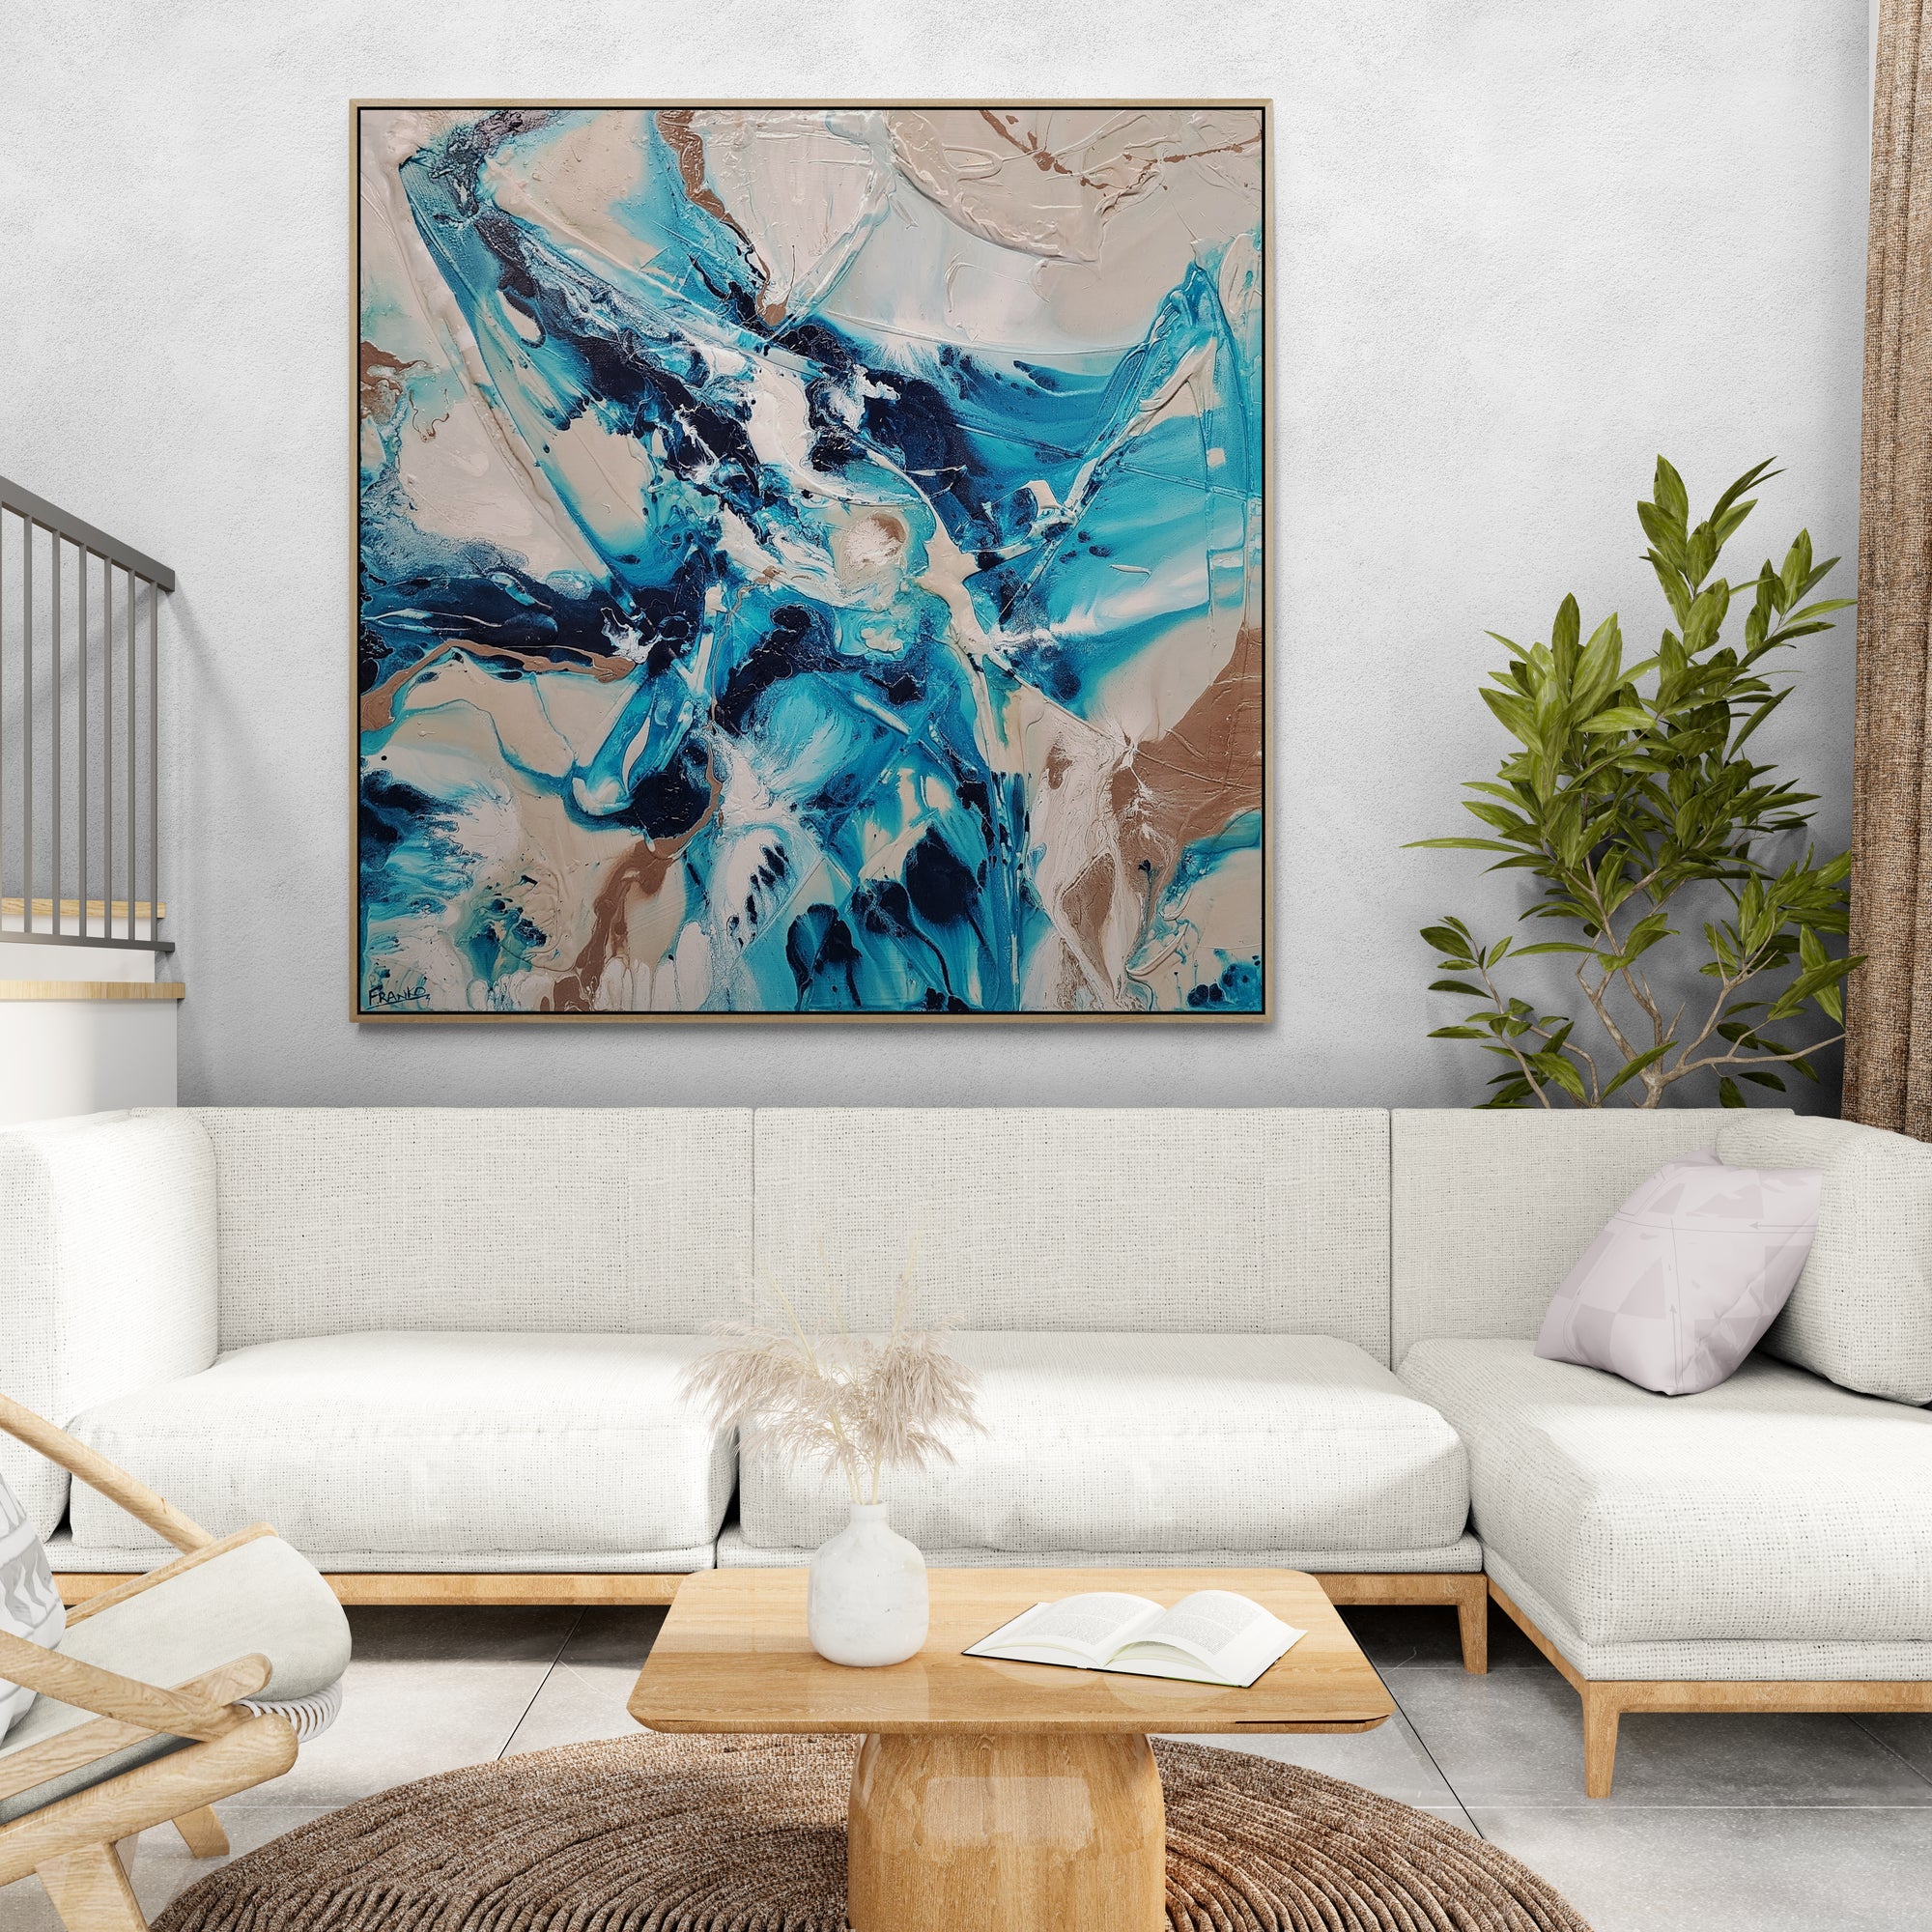 Southern Sugar 120cm x 120cm Turquoise Cream White Textured Abstract Painting